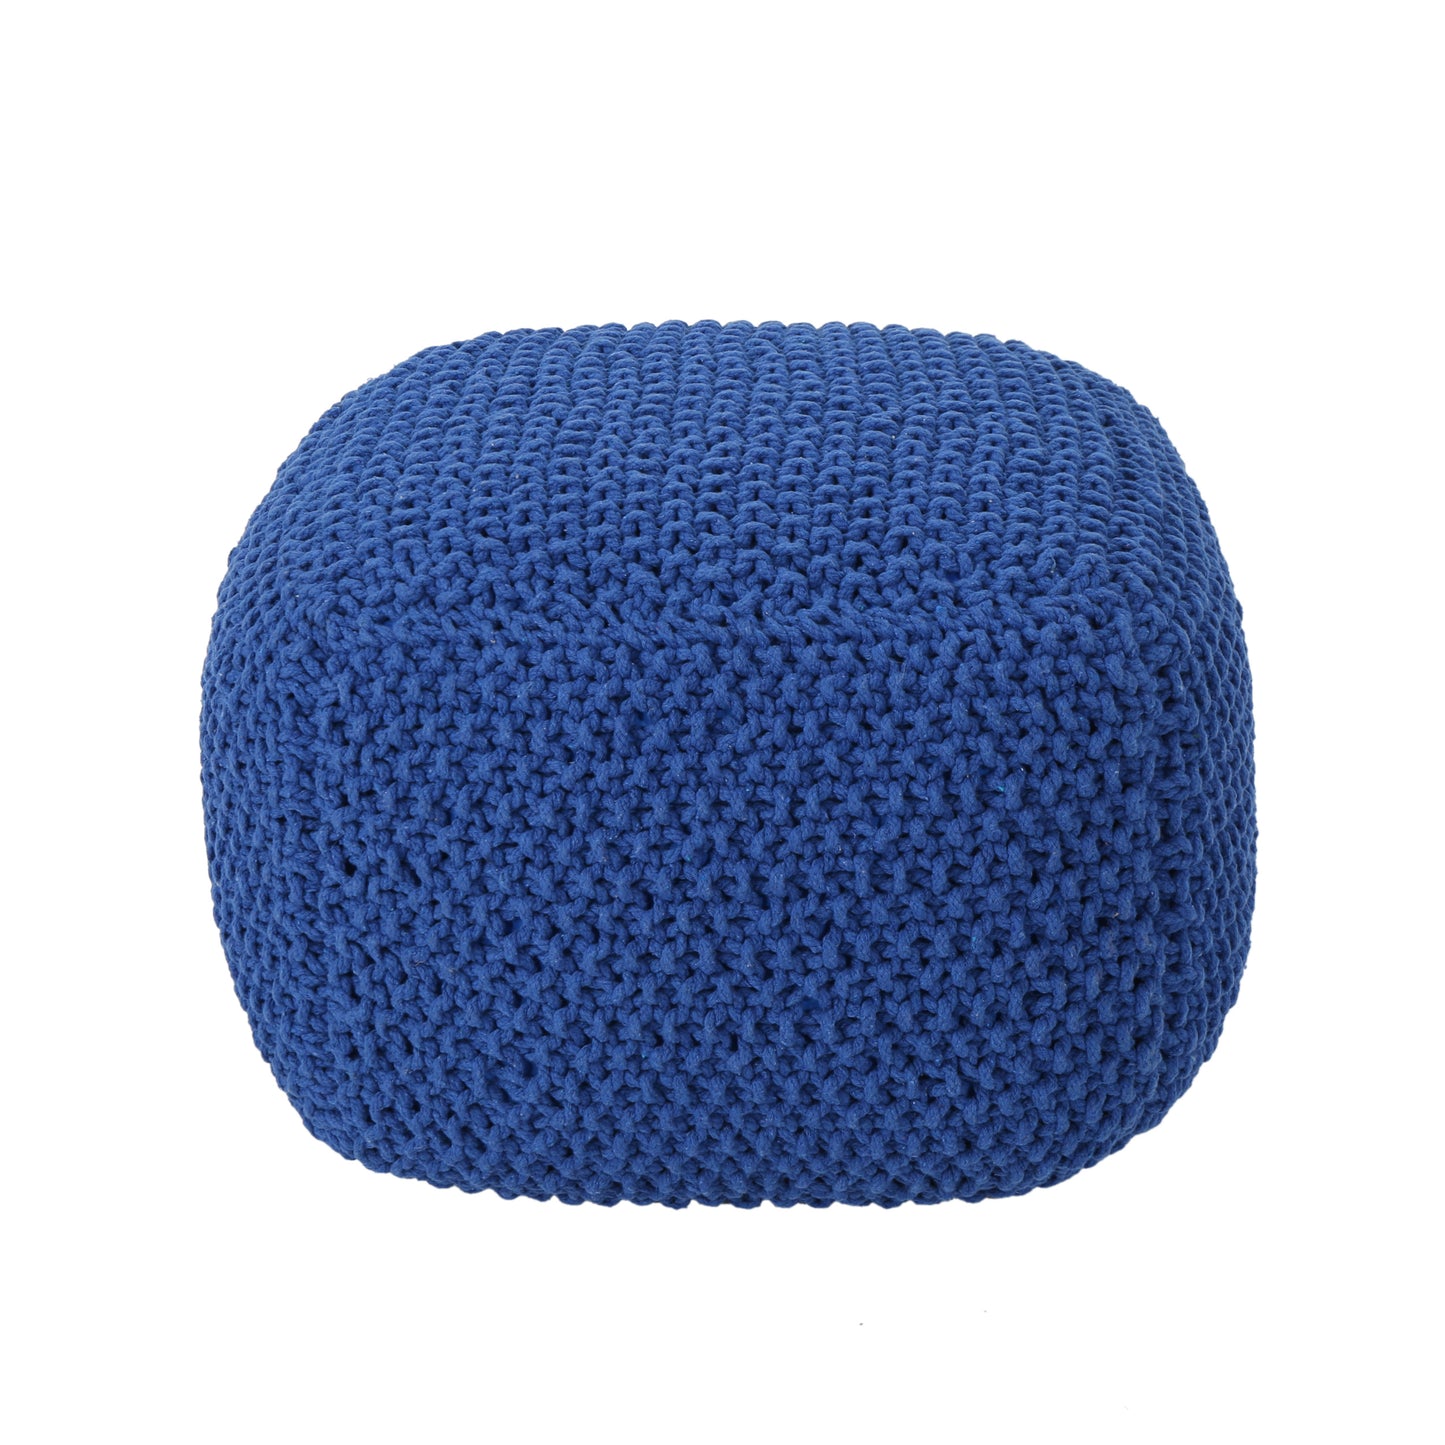 Knox Modern Boho Hand-Knitted Cotton Thread Pouf Foot Stool